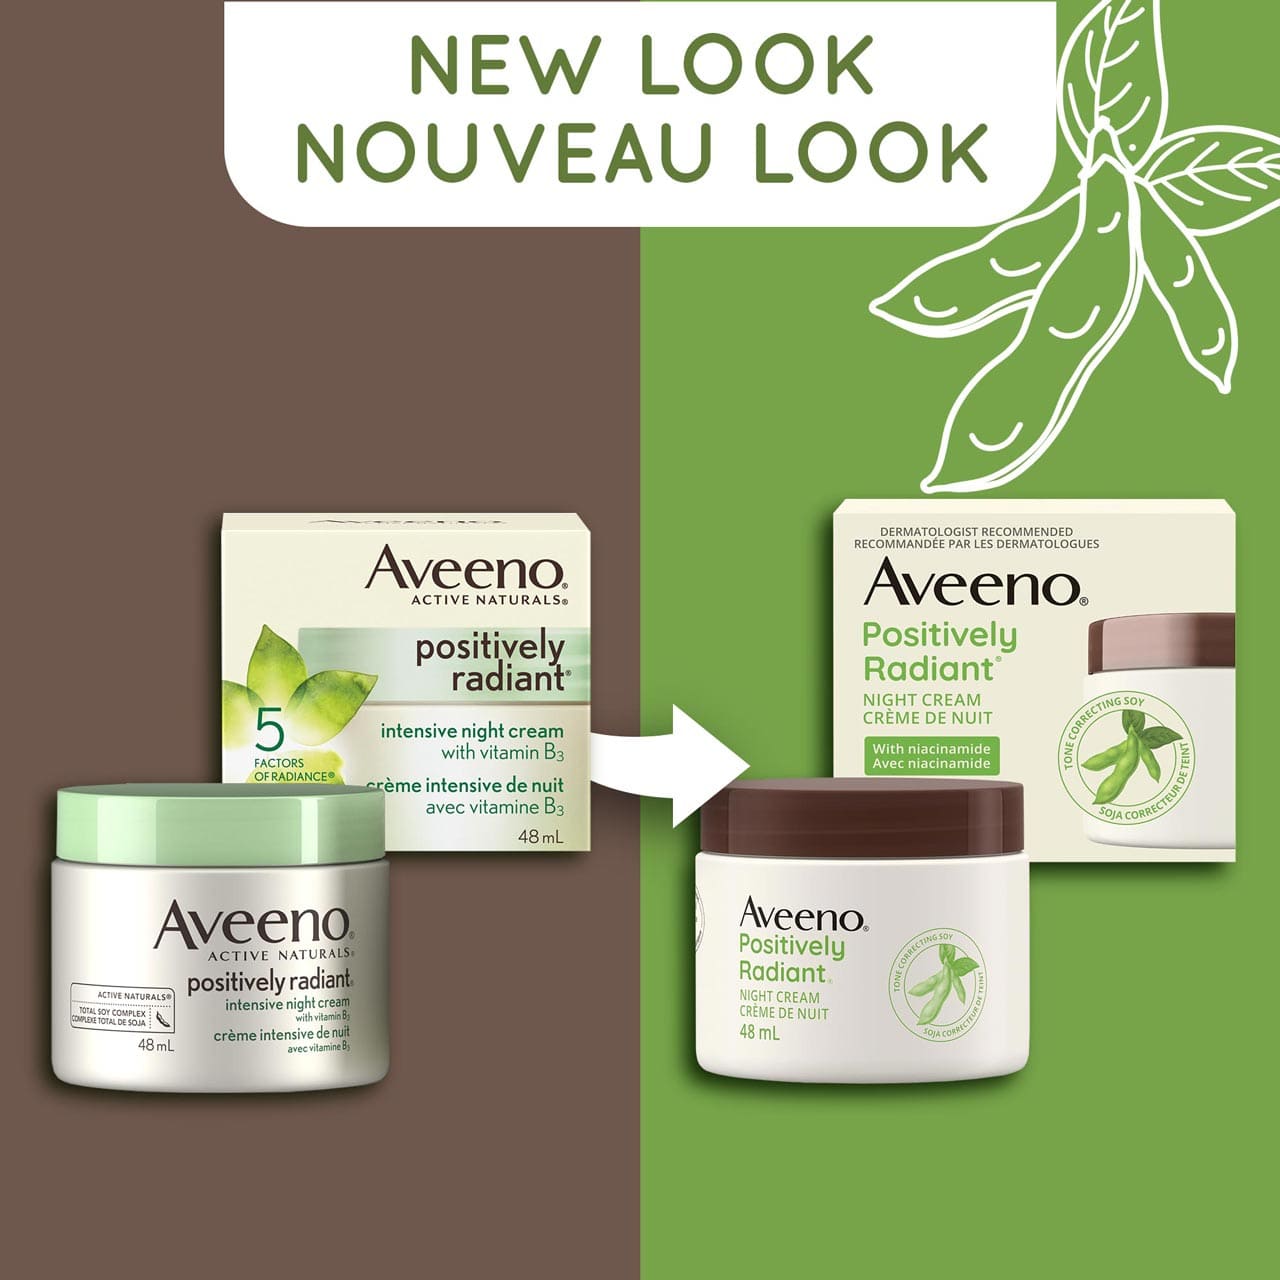 An old and a new packaging of Aveeno Positively Radiant Intensive Night Cream jar, 48mL and a text stating 'New Look'